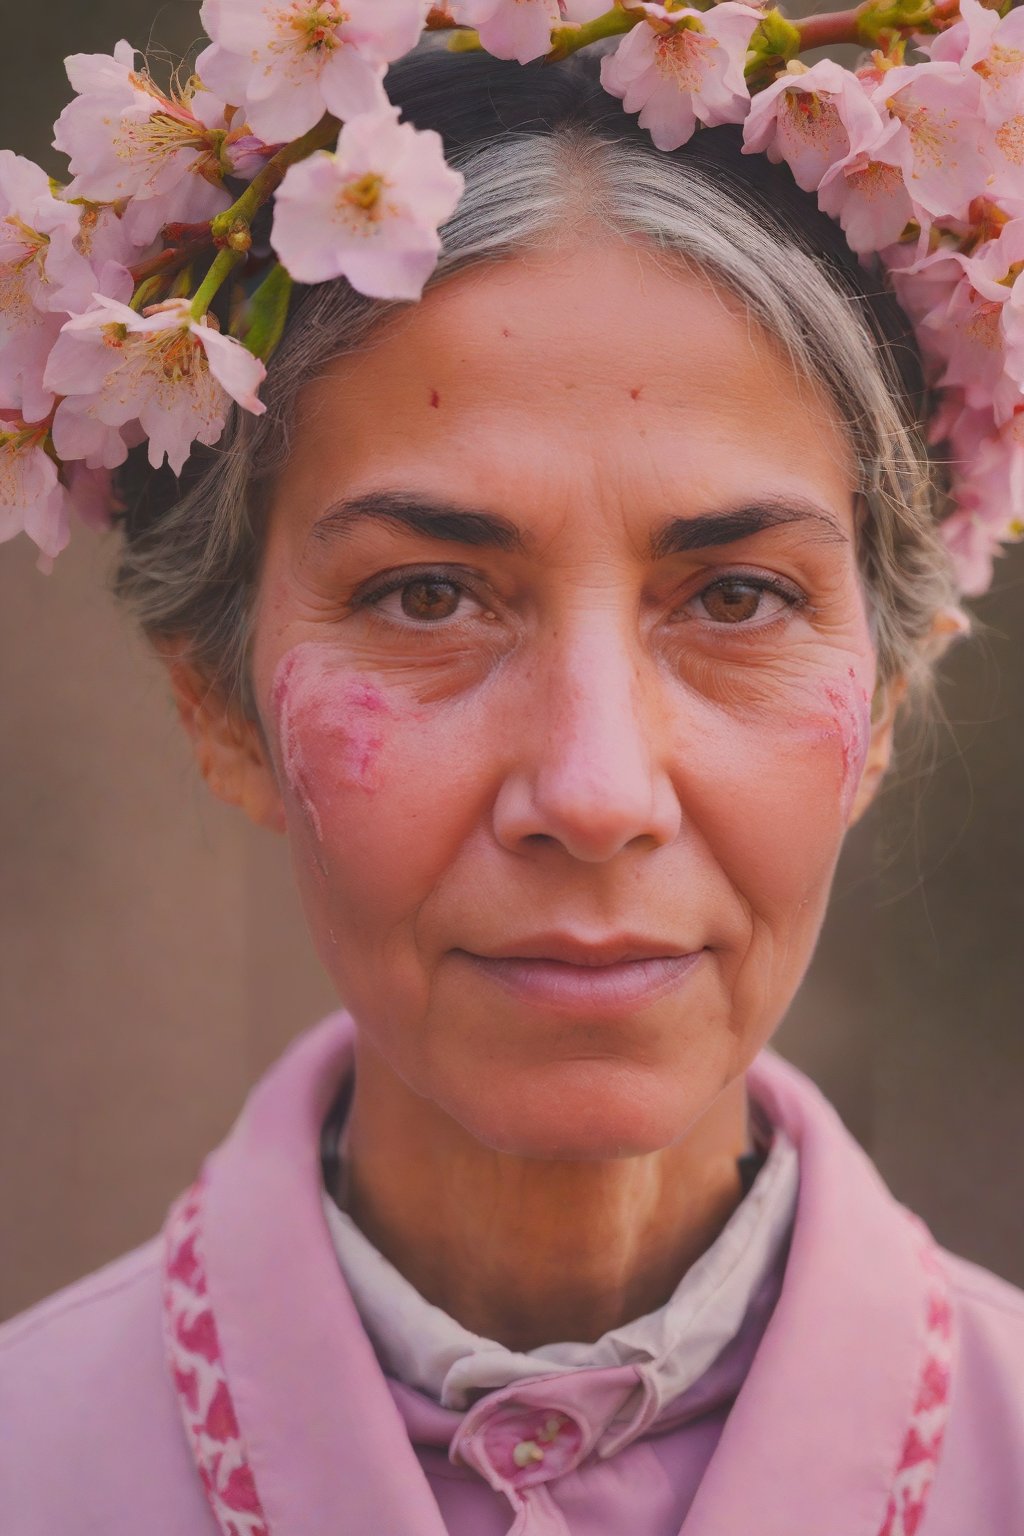 [by Giovanni Gabriele Cantone and (Donna Huanca:1.3) :3], photograph, Injured 52 year old Palestinian 1girl as Amish Space Mage, Two-Tone hair, cherry blossom pink Anime Eyes, Bokeh, Ultrarealistic, Fujicolor Pro 400H, 50mm, Impasto